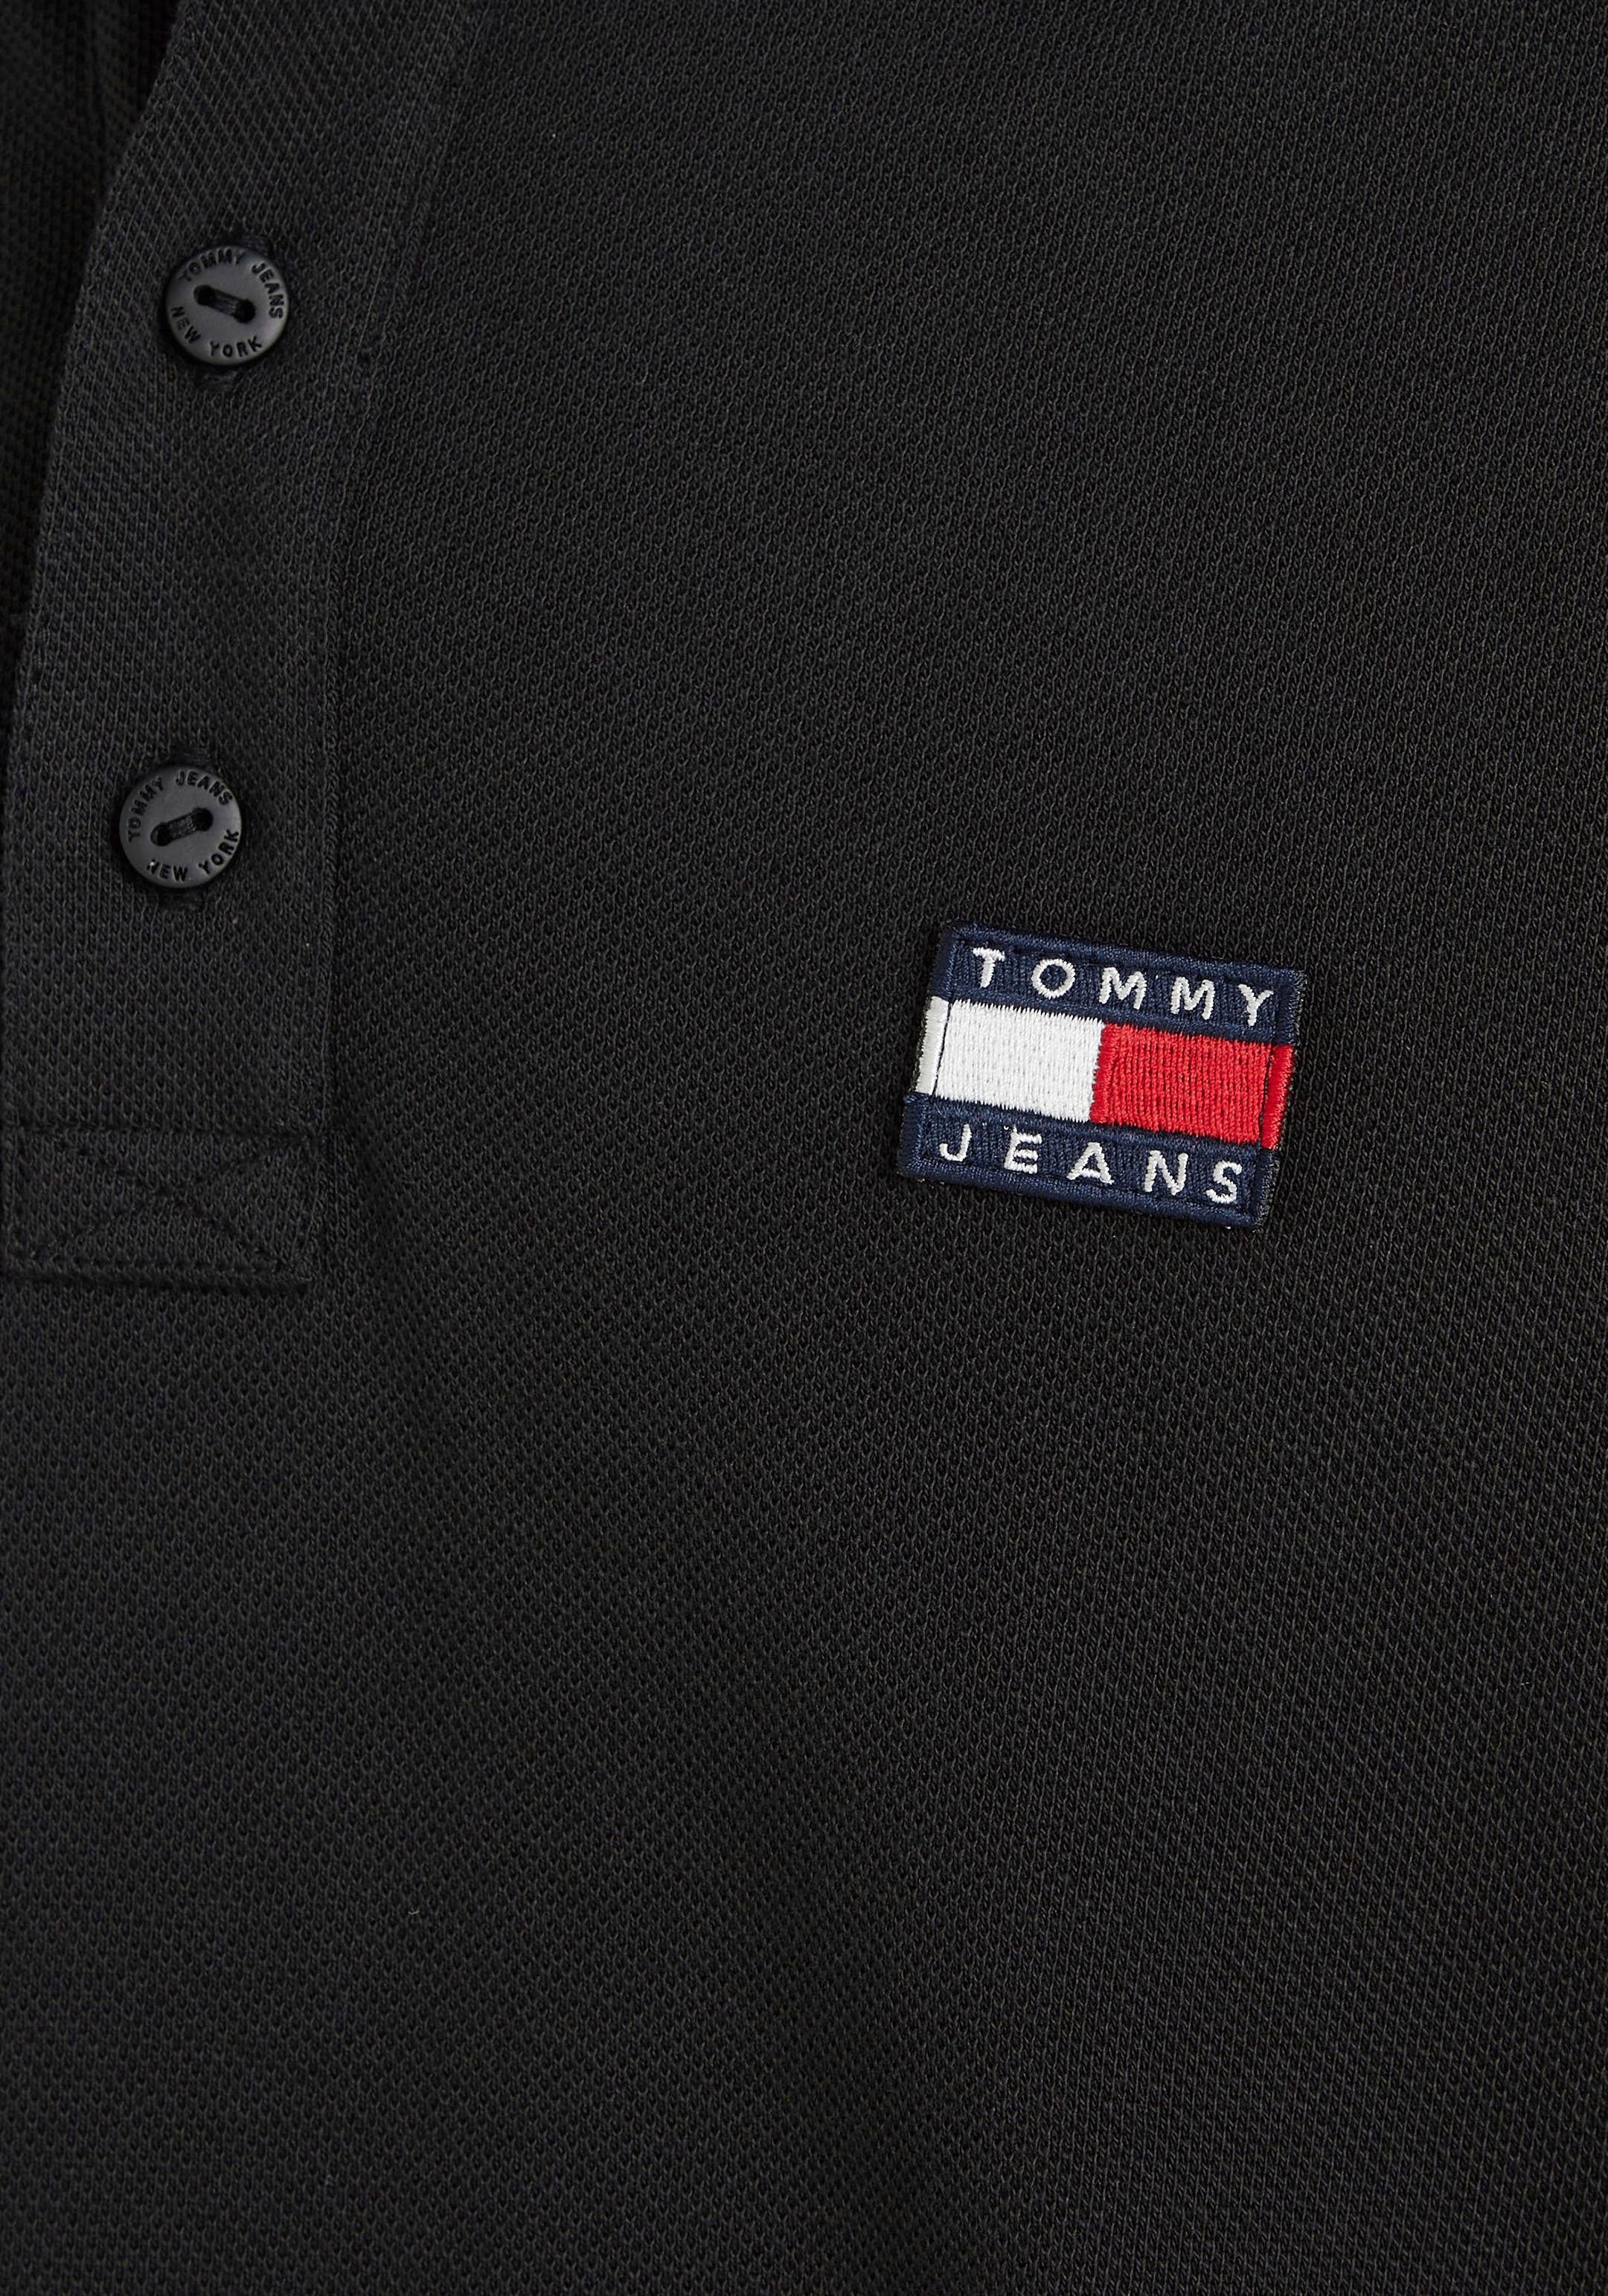 Poloshirt mit POLO«, CLSC XS bei 3-Knopf-Form ♕ Tommy BADGE »TJM Jeans